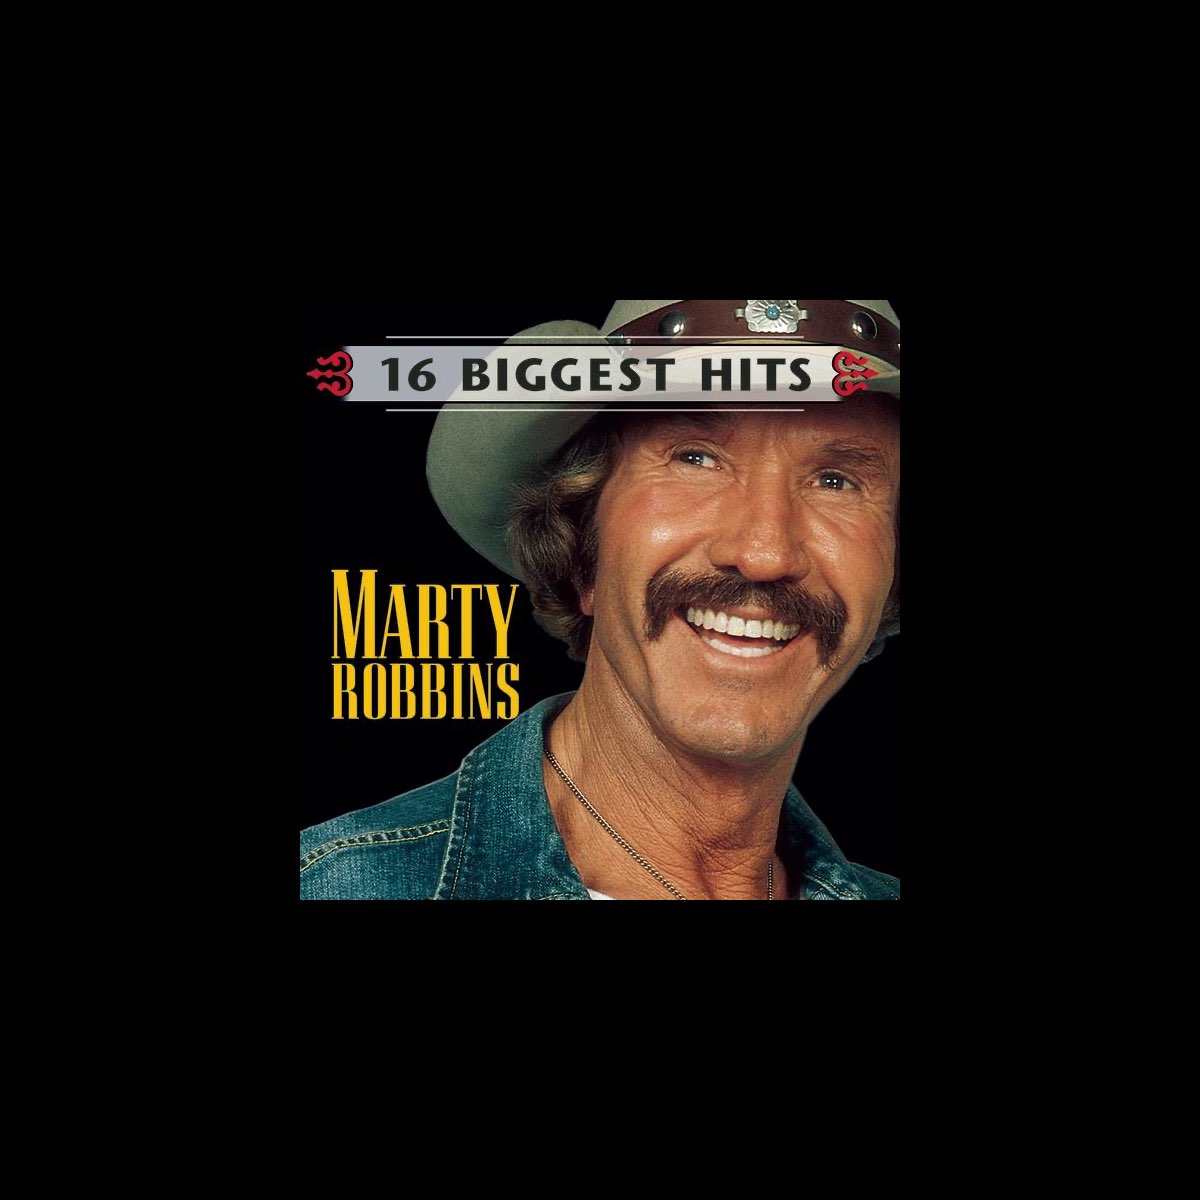 ‎marty Robbins 16 Biggest Hits Album By Marty Robbins Apple Music